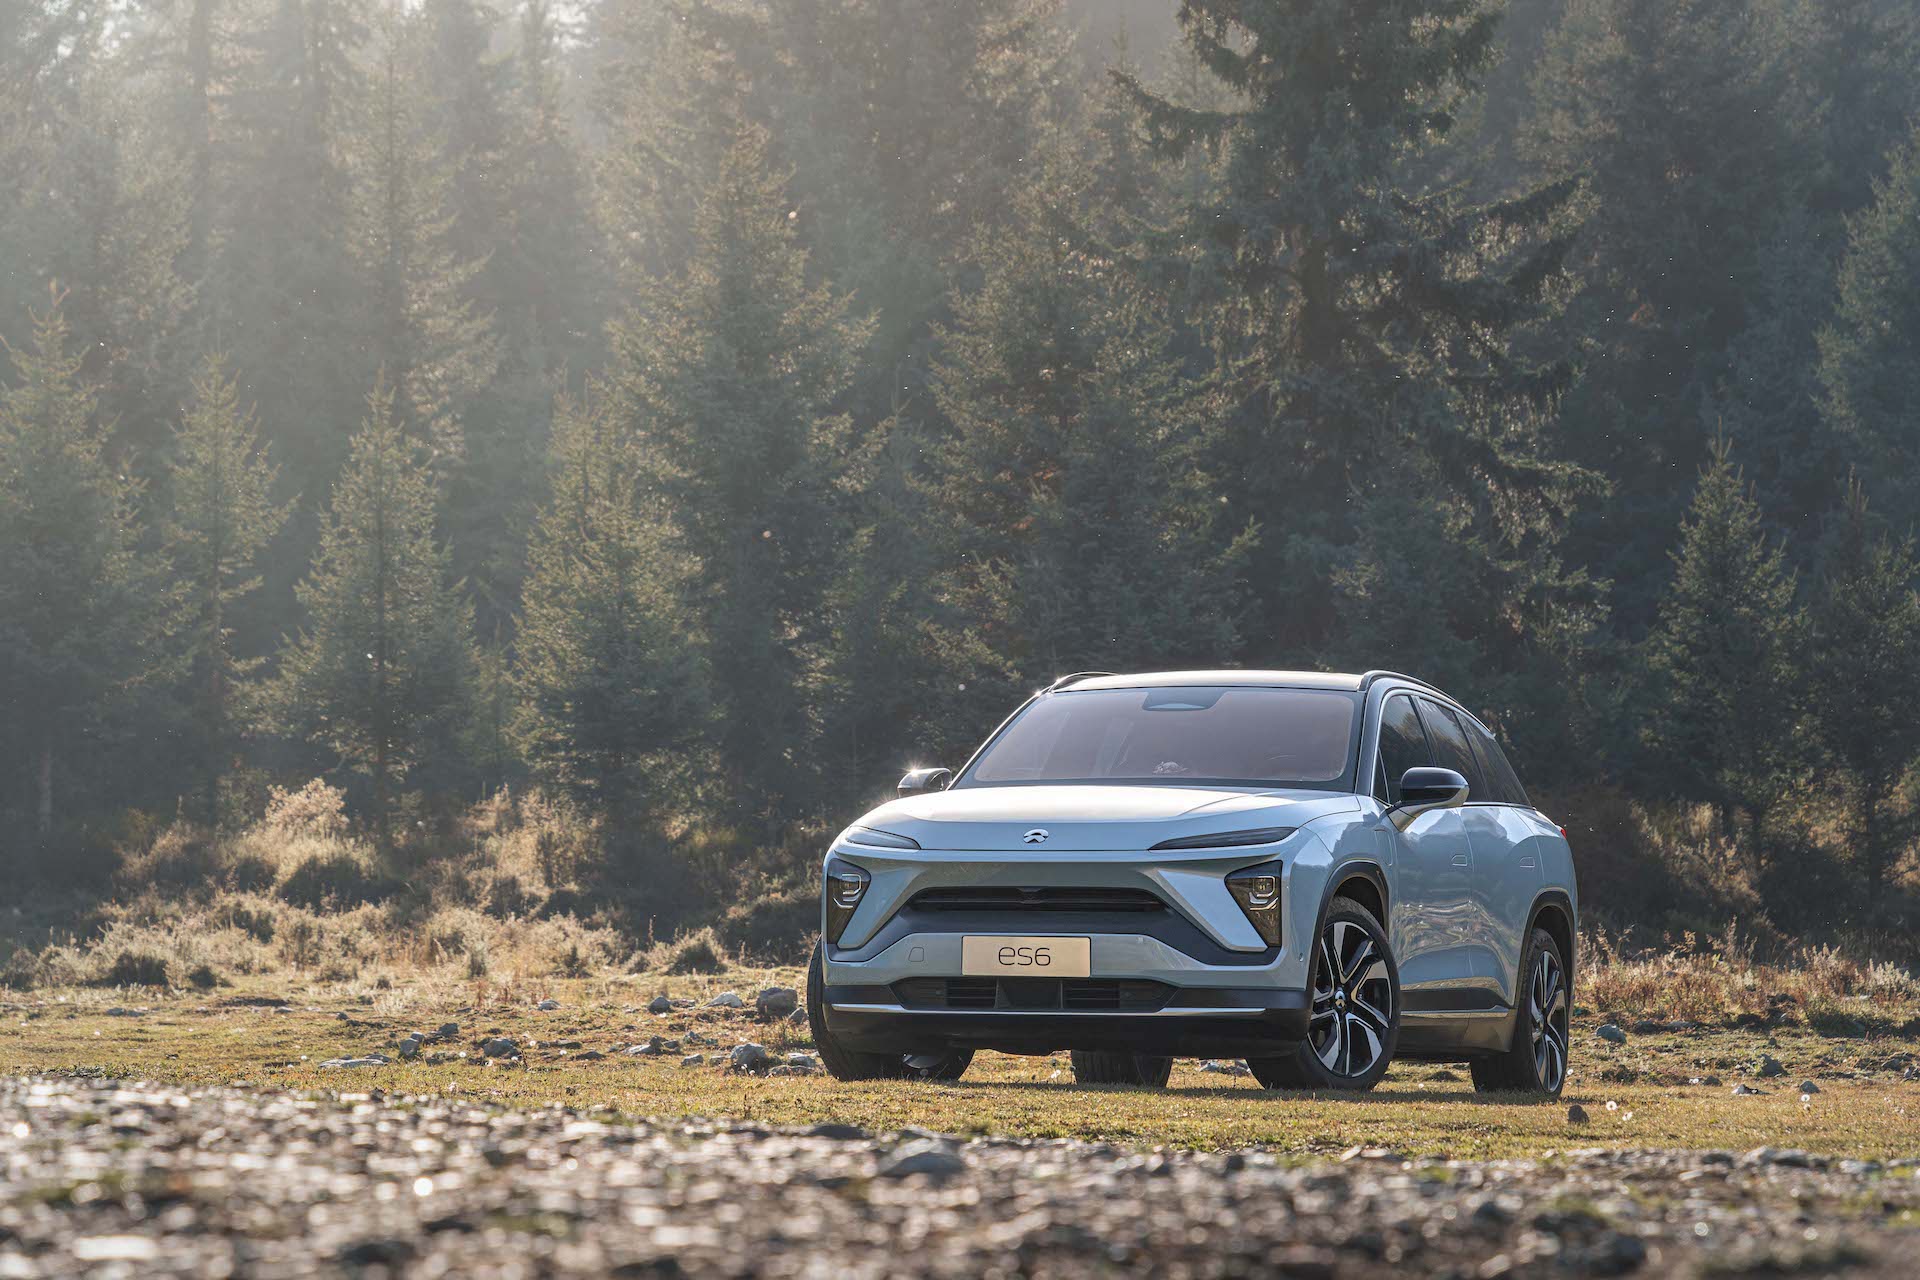 NIO Inc. Provides October 2021 Delivery Update